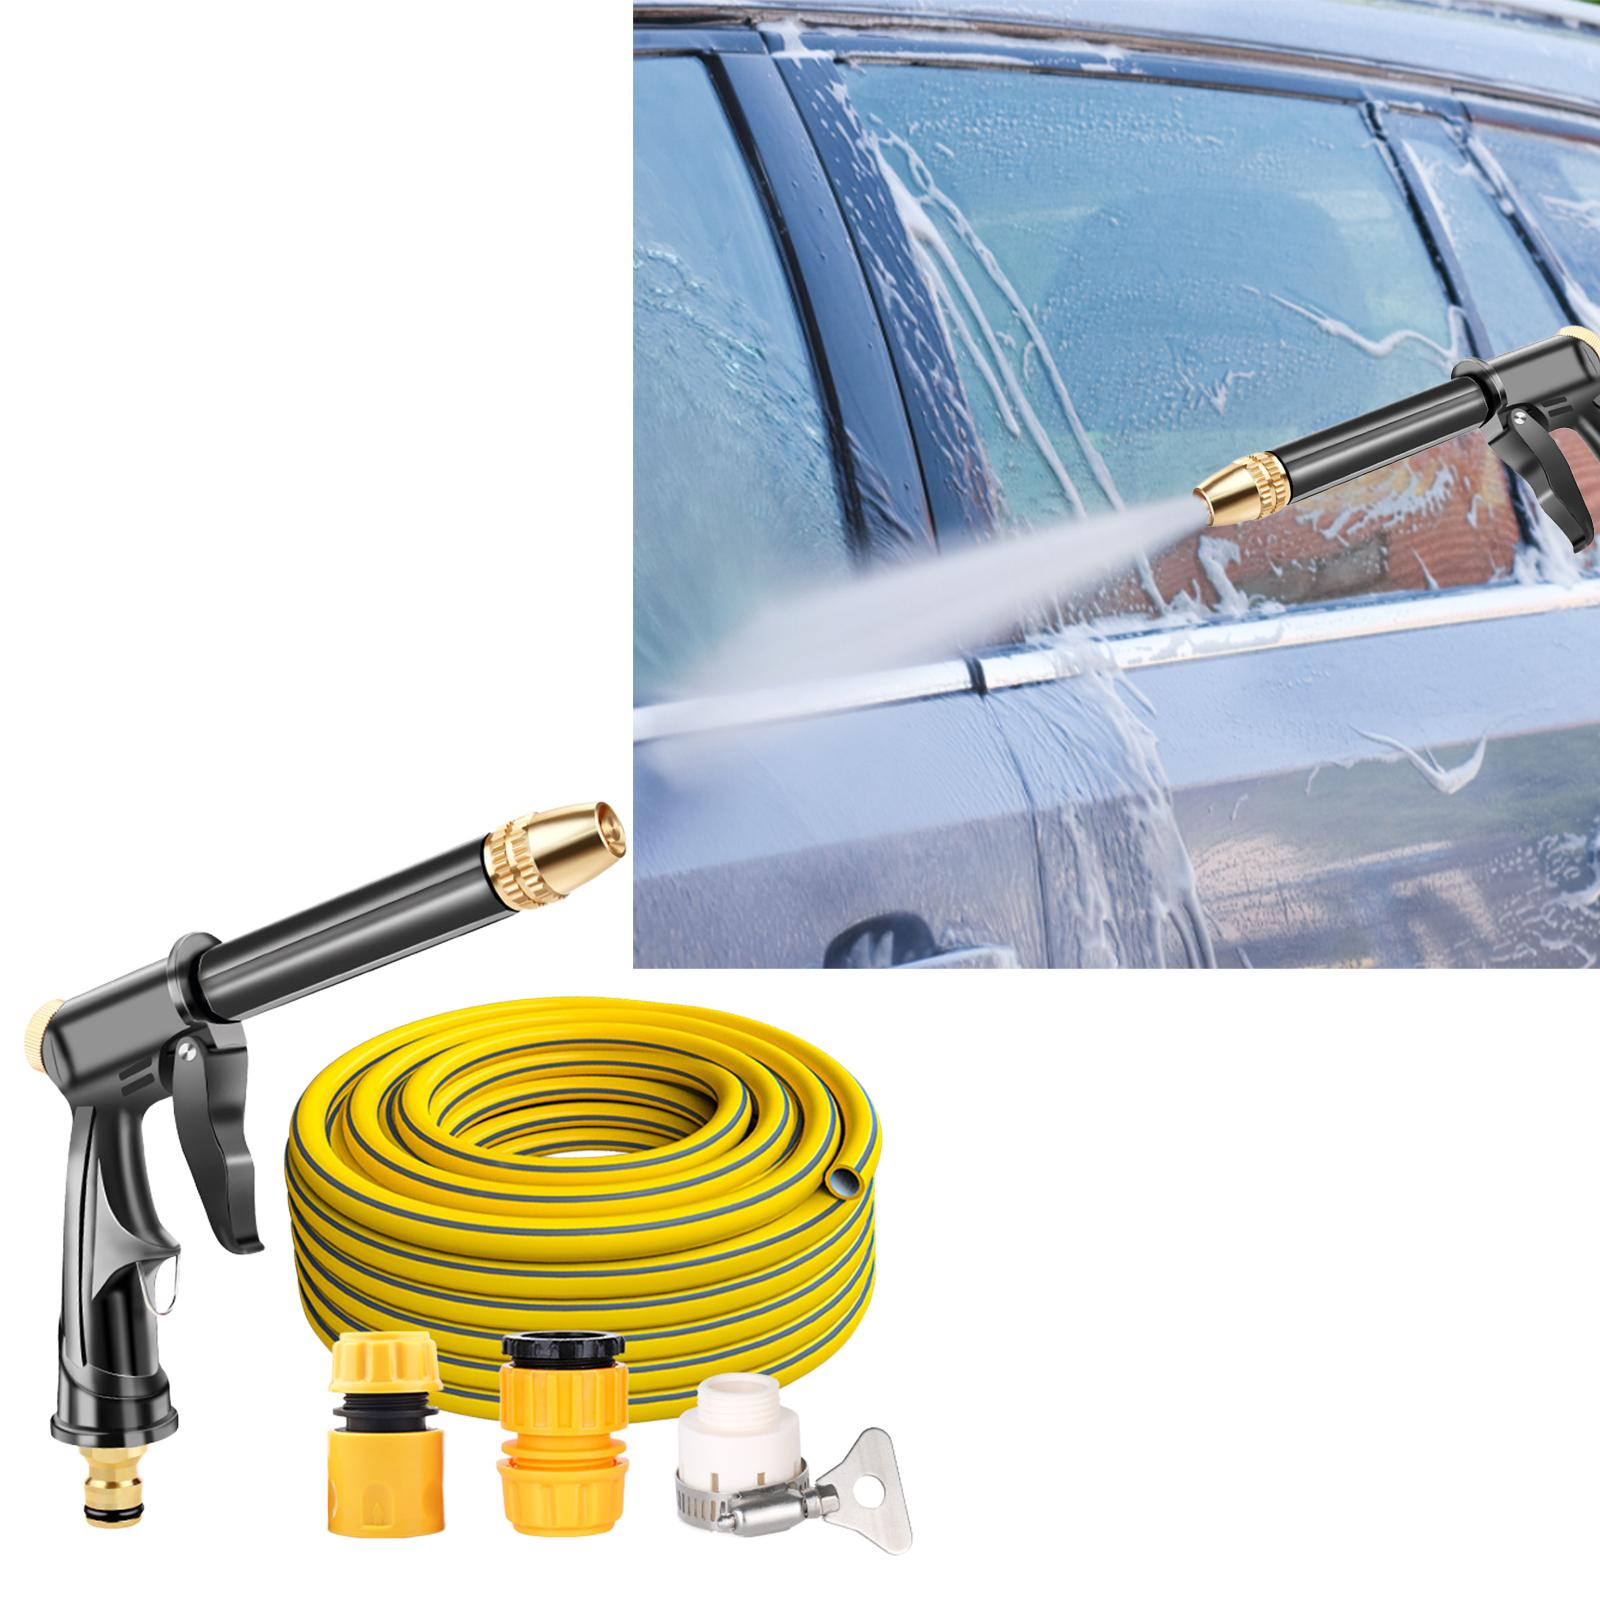 High Pressure Washer Pressure Cleaning Machine for Cars Garden Cleaning